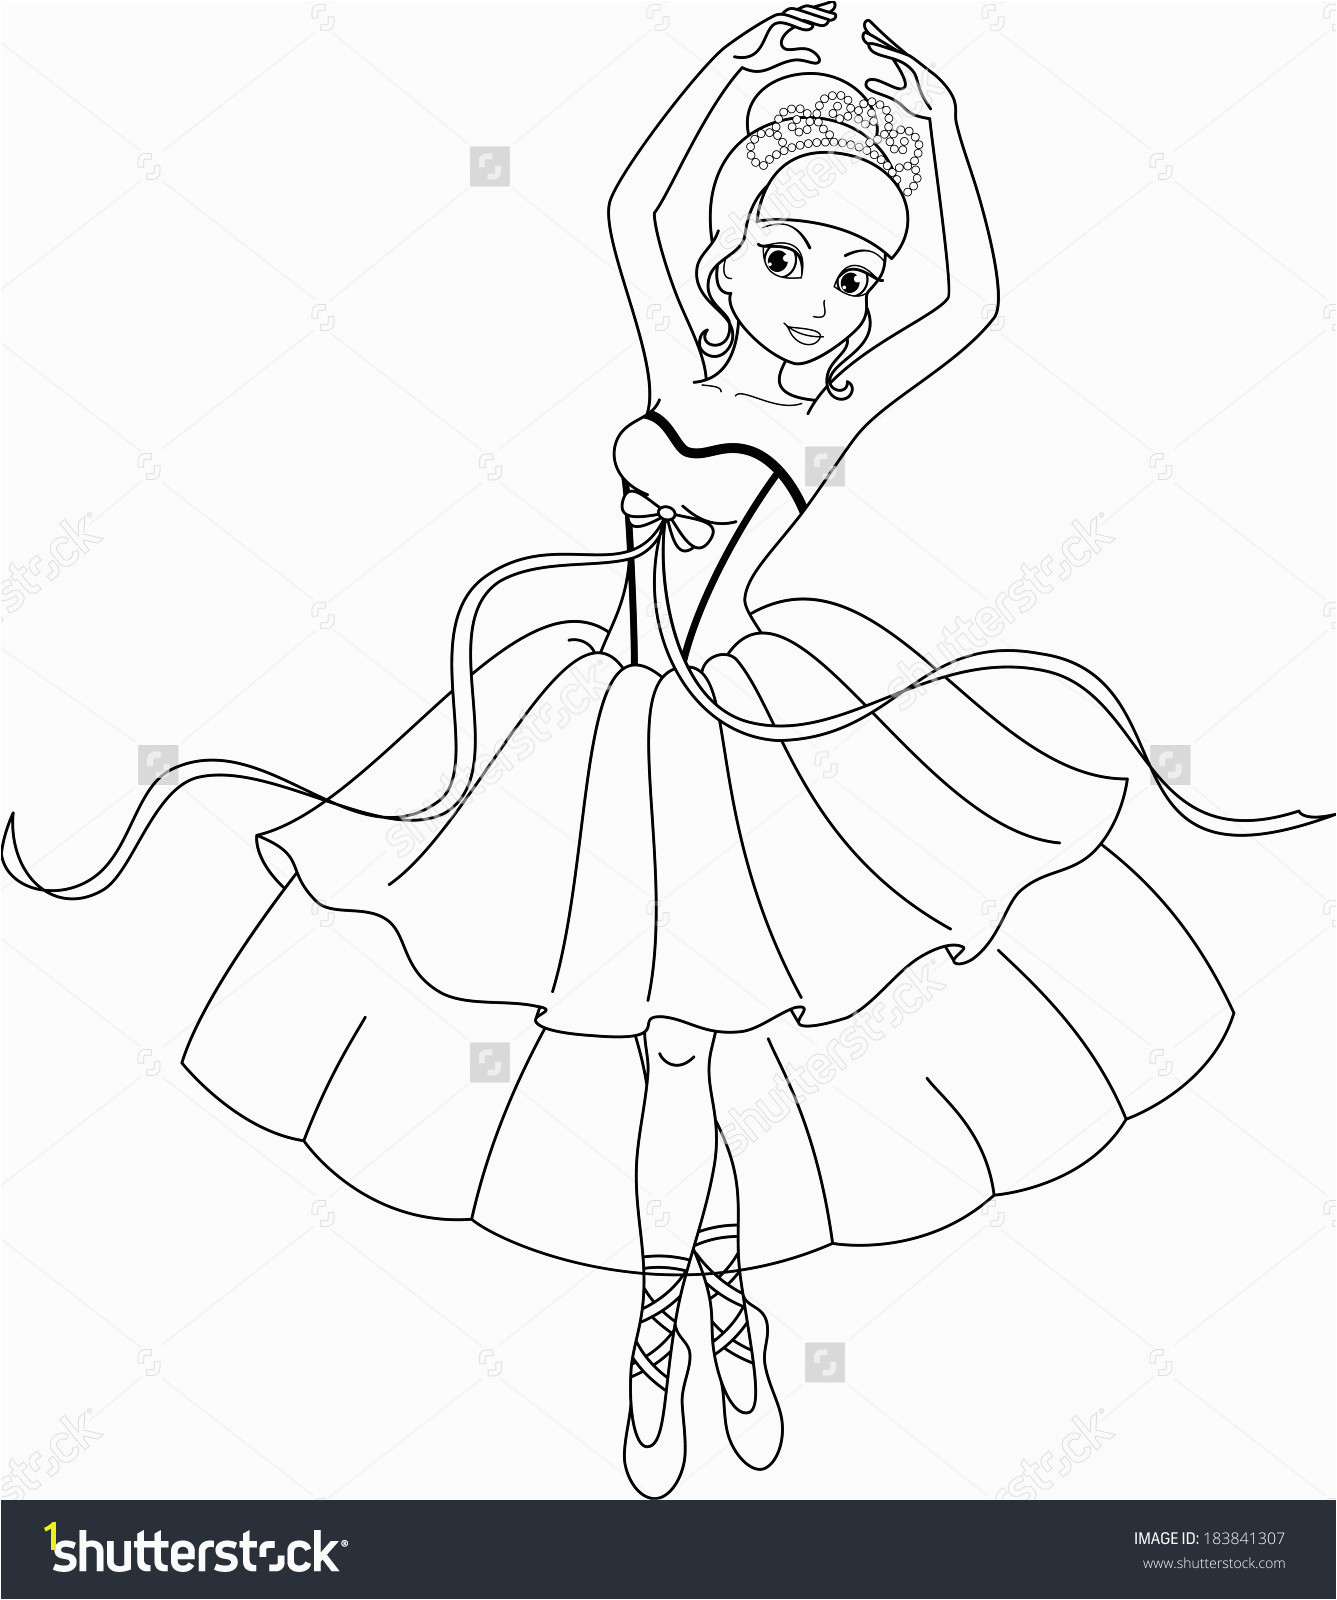 Ballerina Coloring Pages Pdf Ballerina Coloring Pages